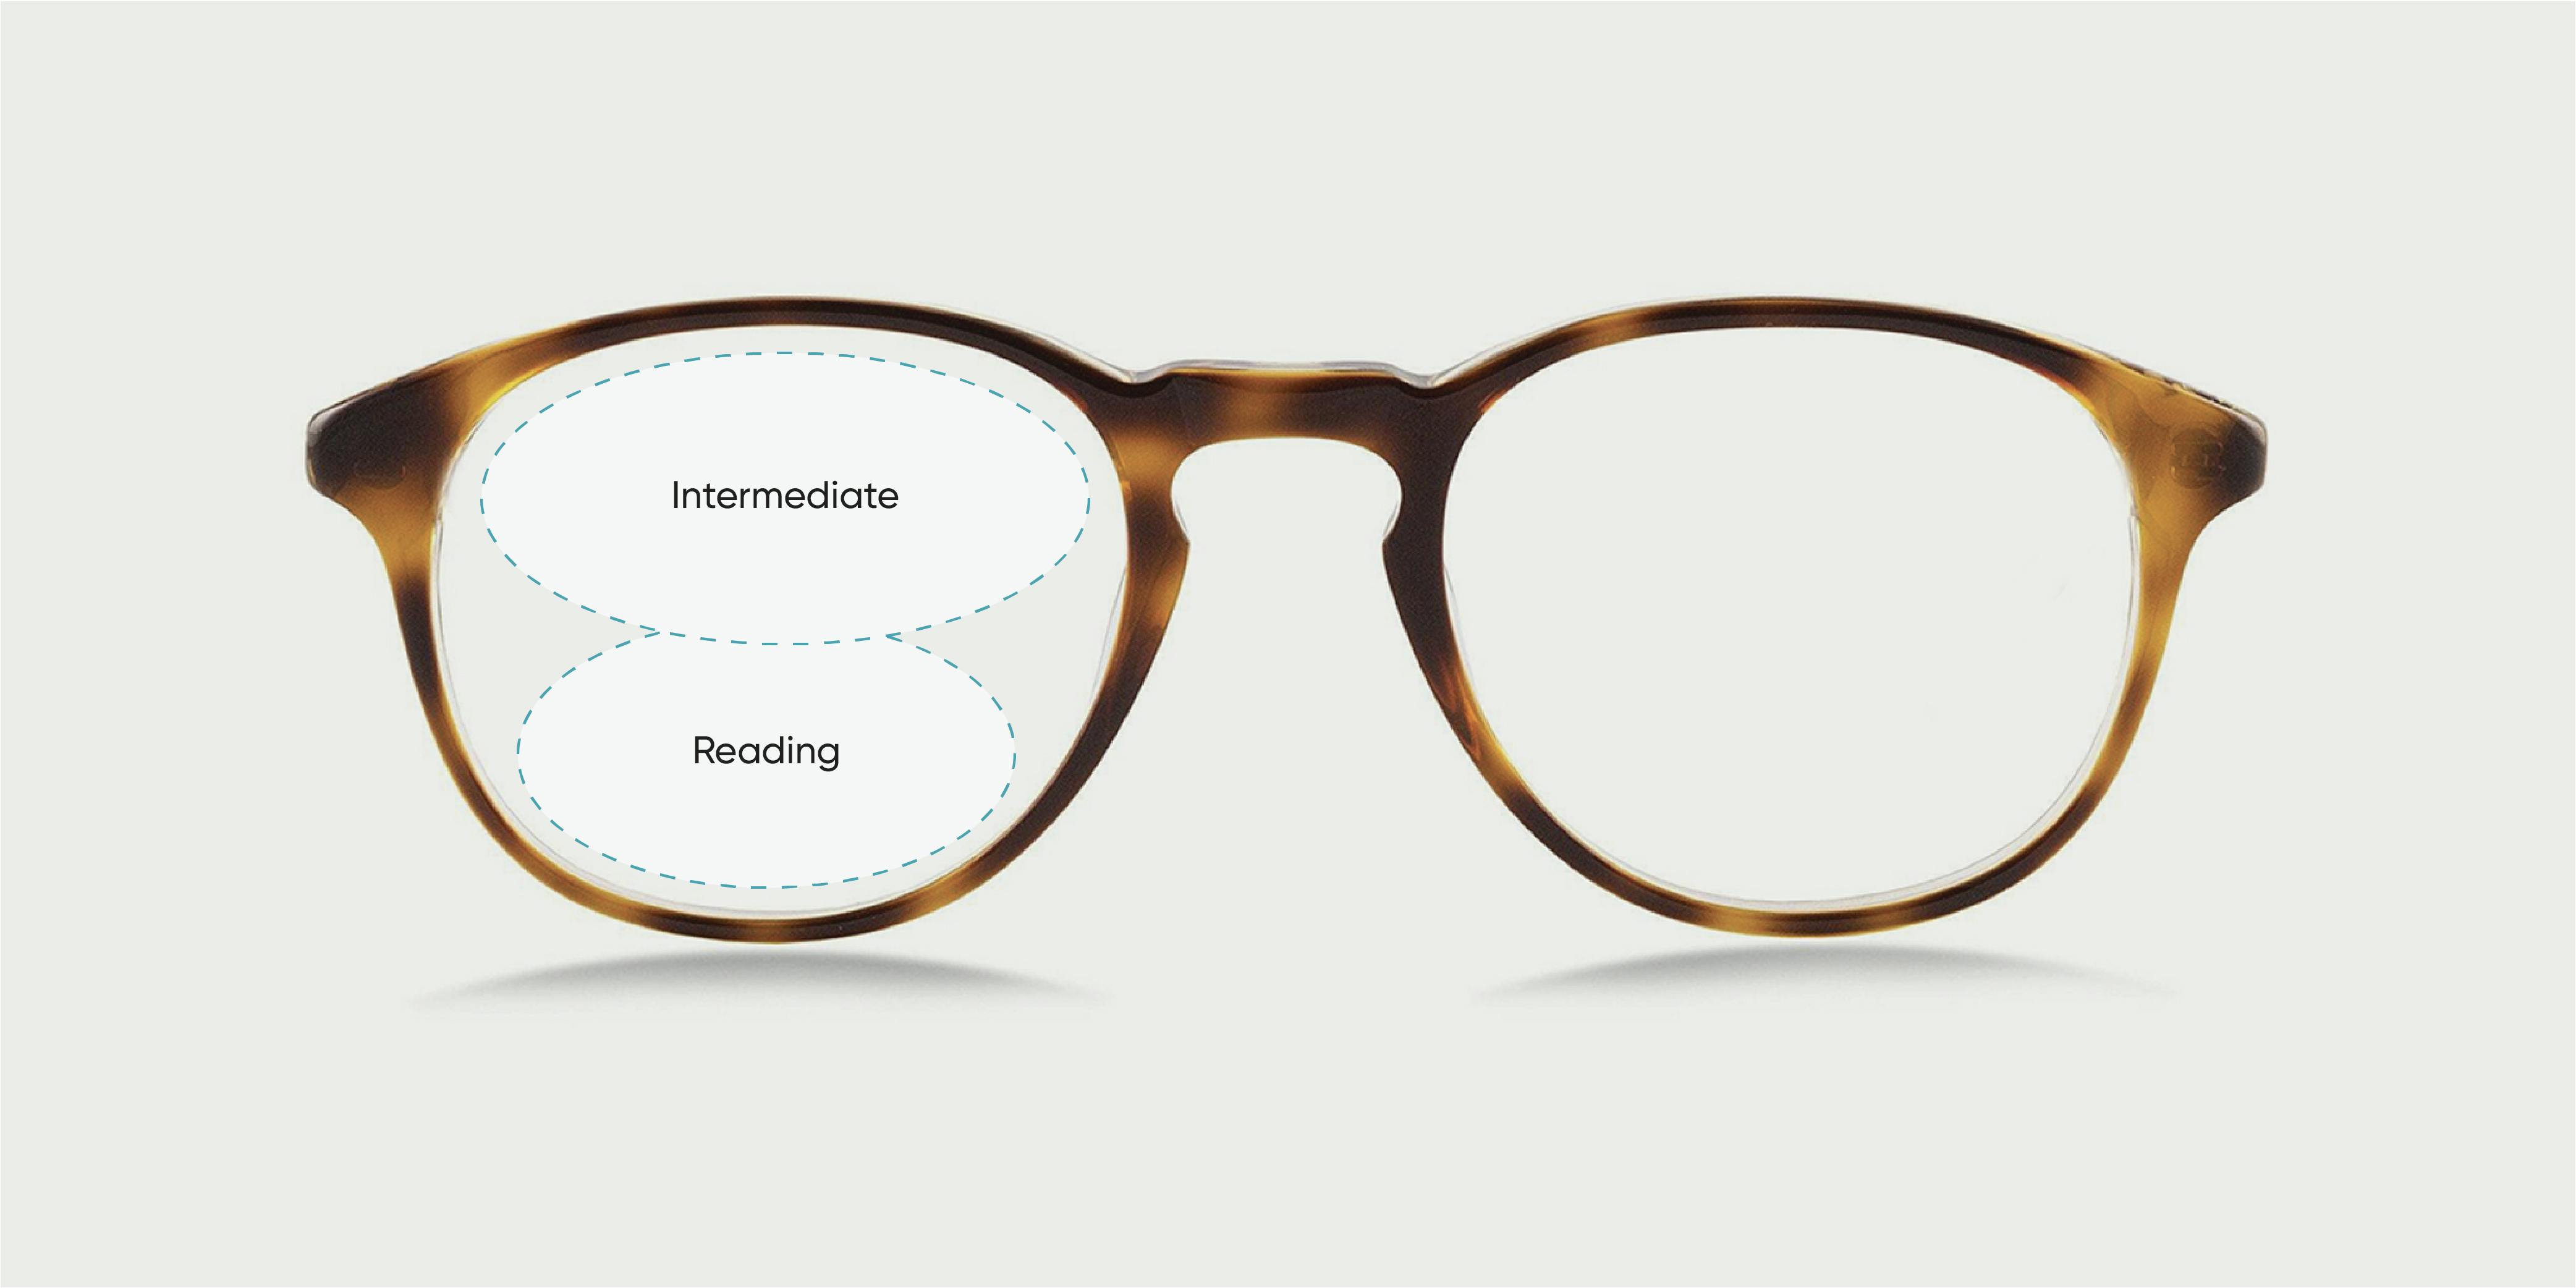 A pair of glasses with a diagram on the lens of the intermediate and reading portions of an office lens.